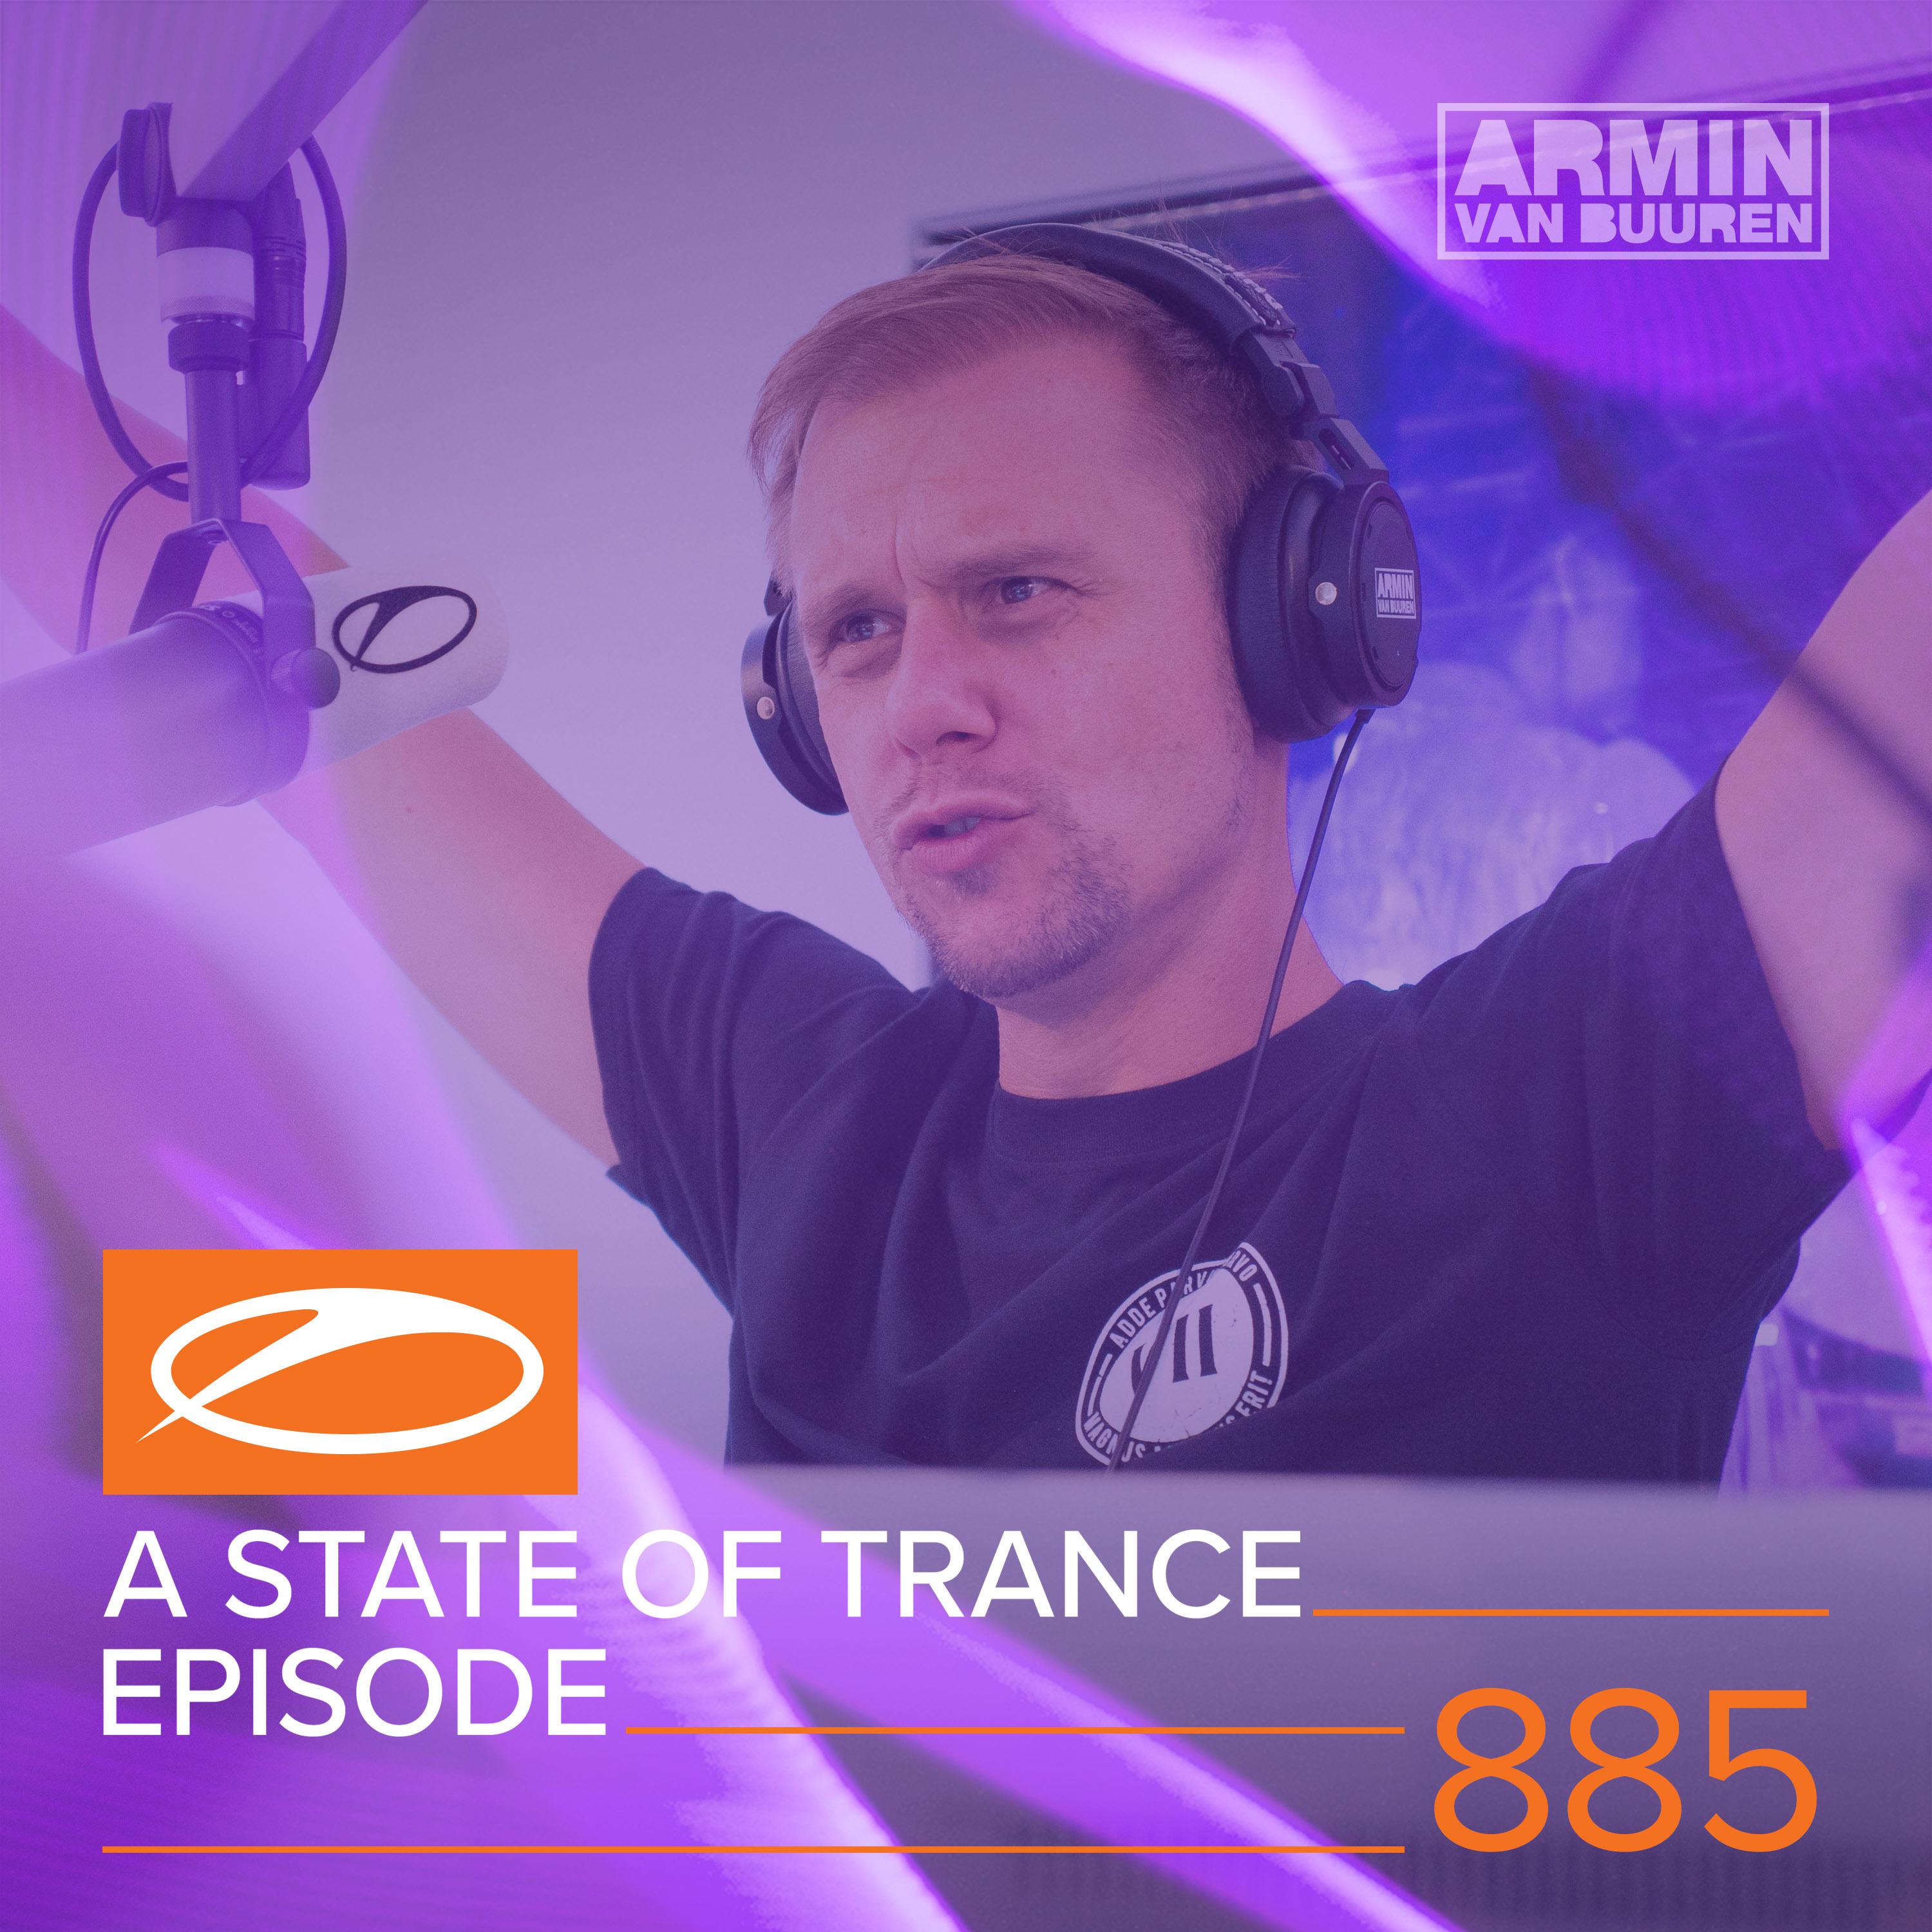 A State Of Trance (ASOT 885) (Coming Up, Pt. 4)